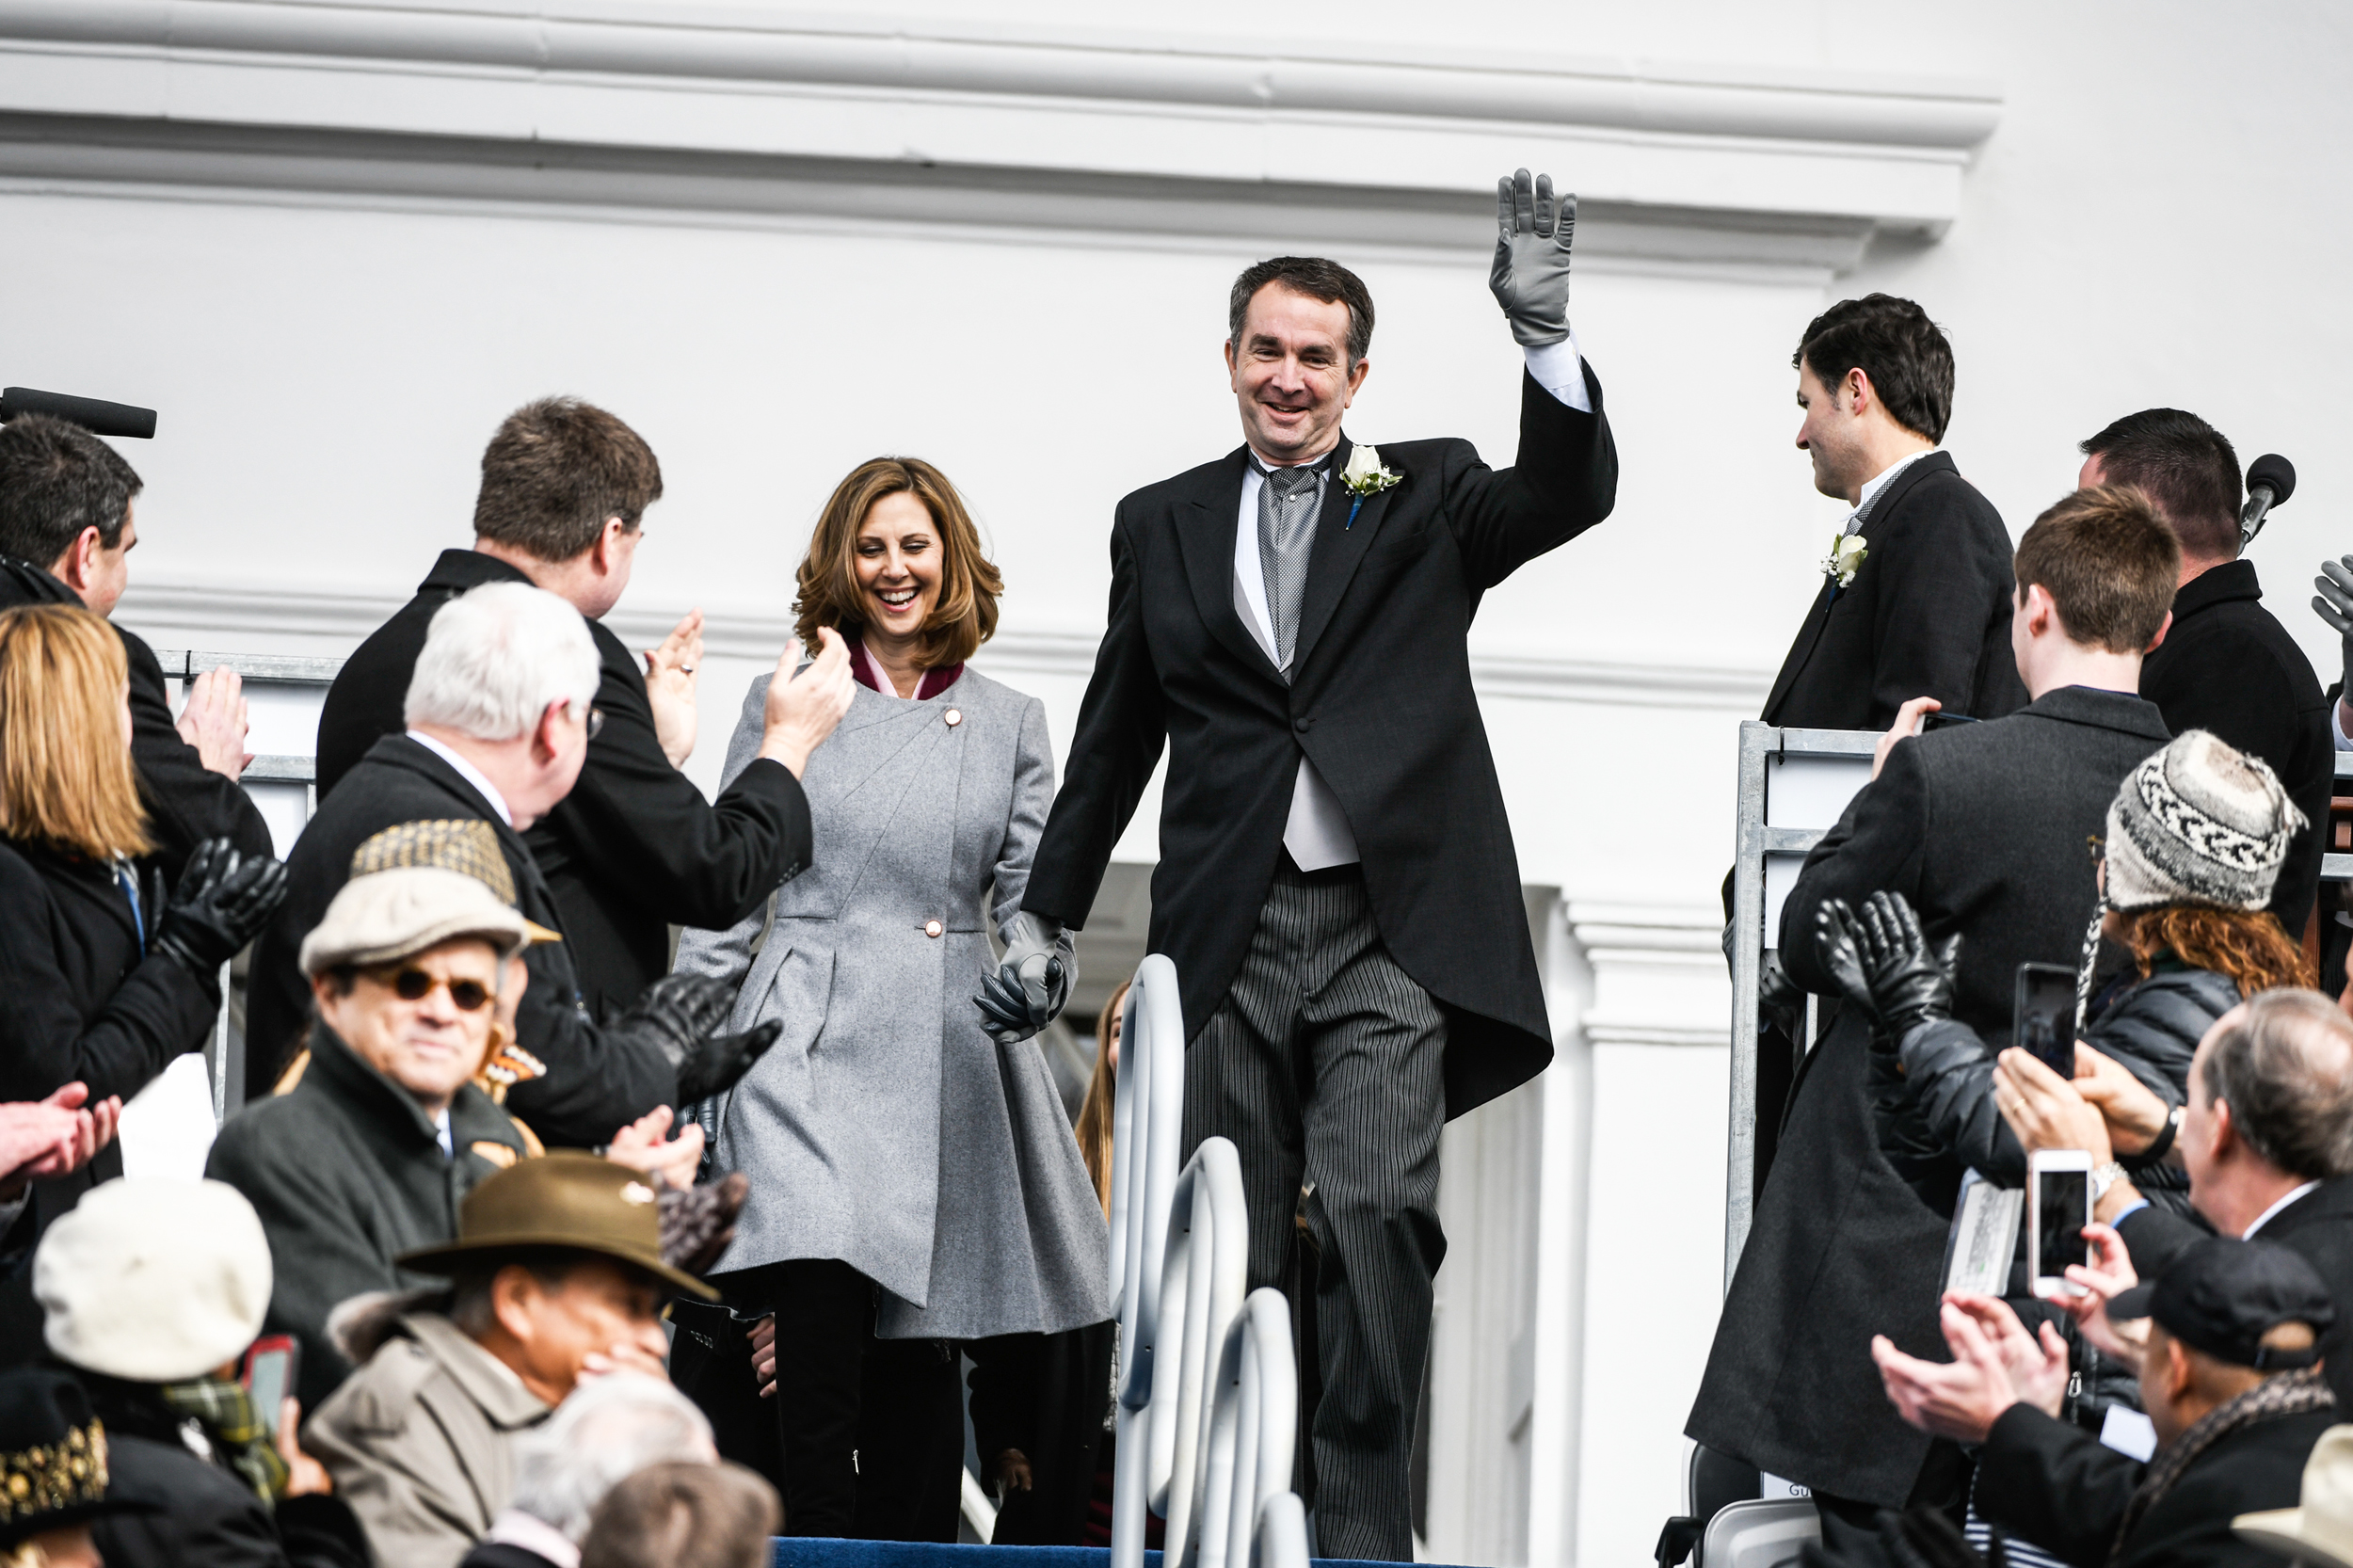 PHOTO: Gov. Elect Ralph Northam and his wife, Pam Northam make their way to the inaugural platform before taking the oath of the office on Jan. 13, 2018, at the Virginia State Capitol in Richmond, VA. 